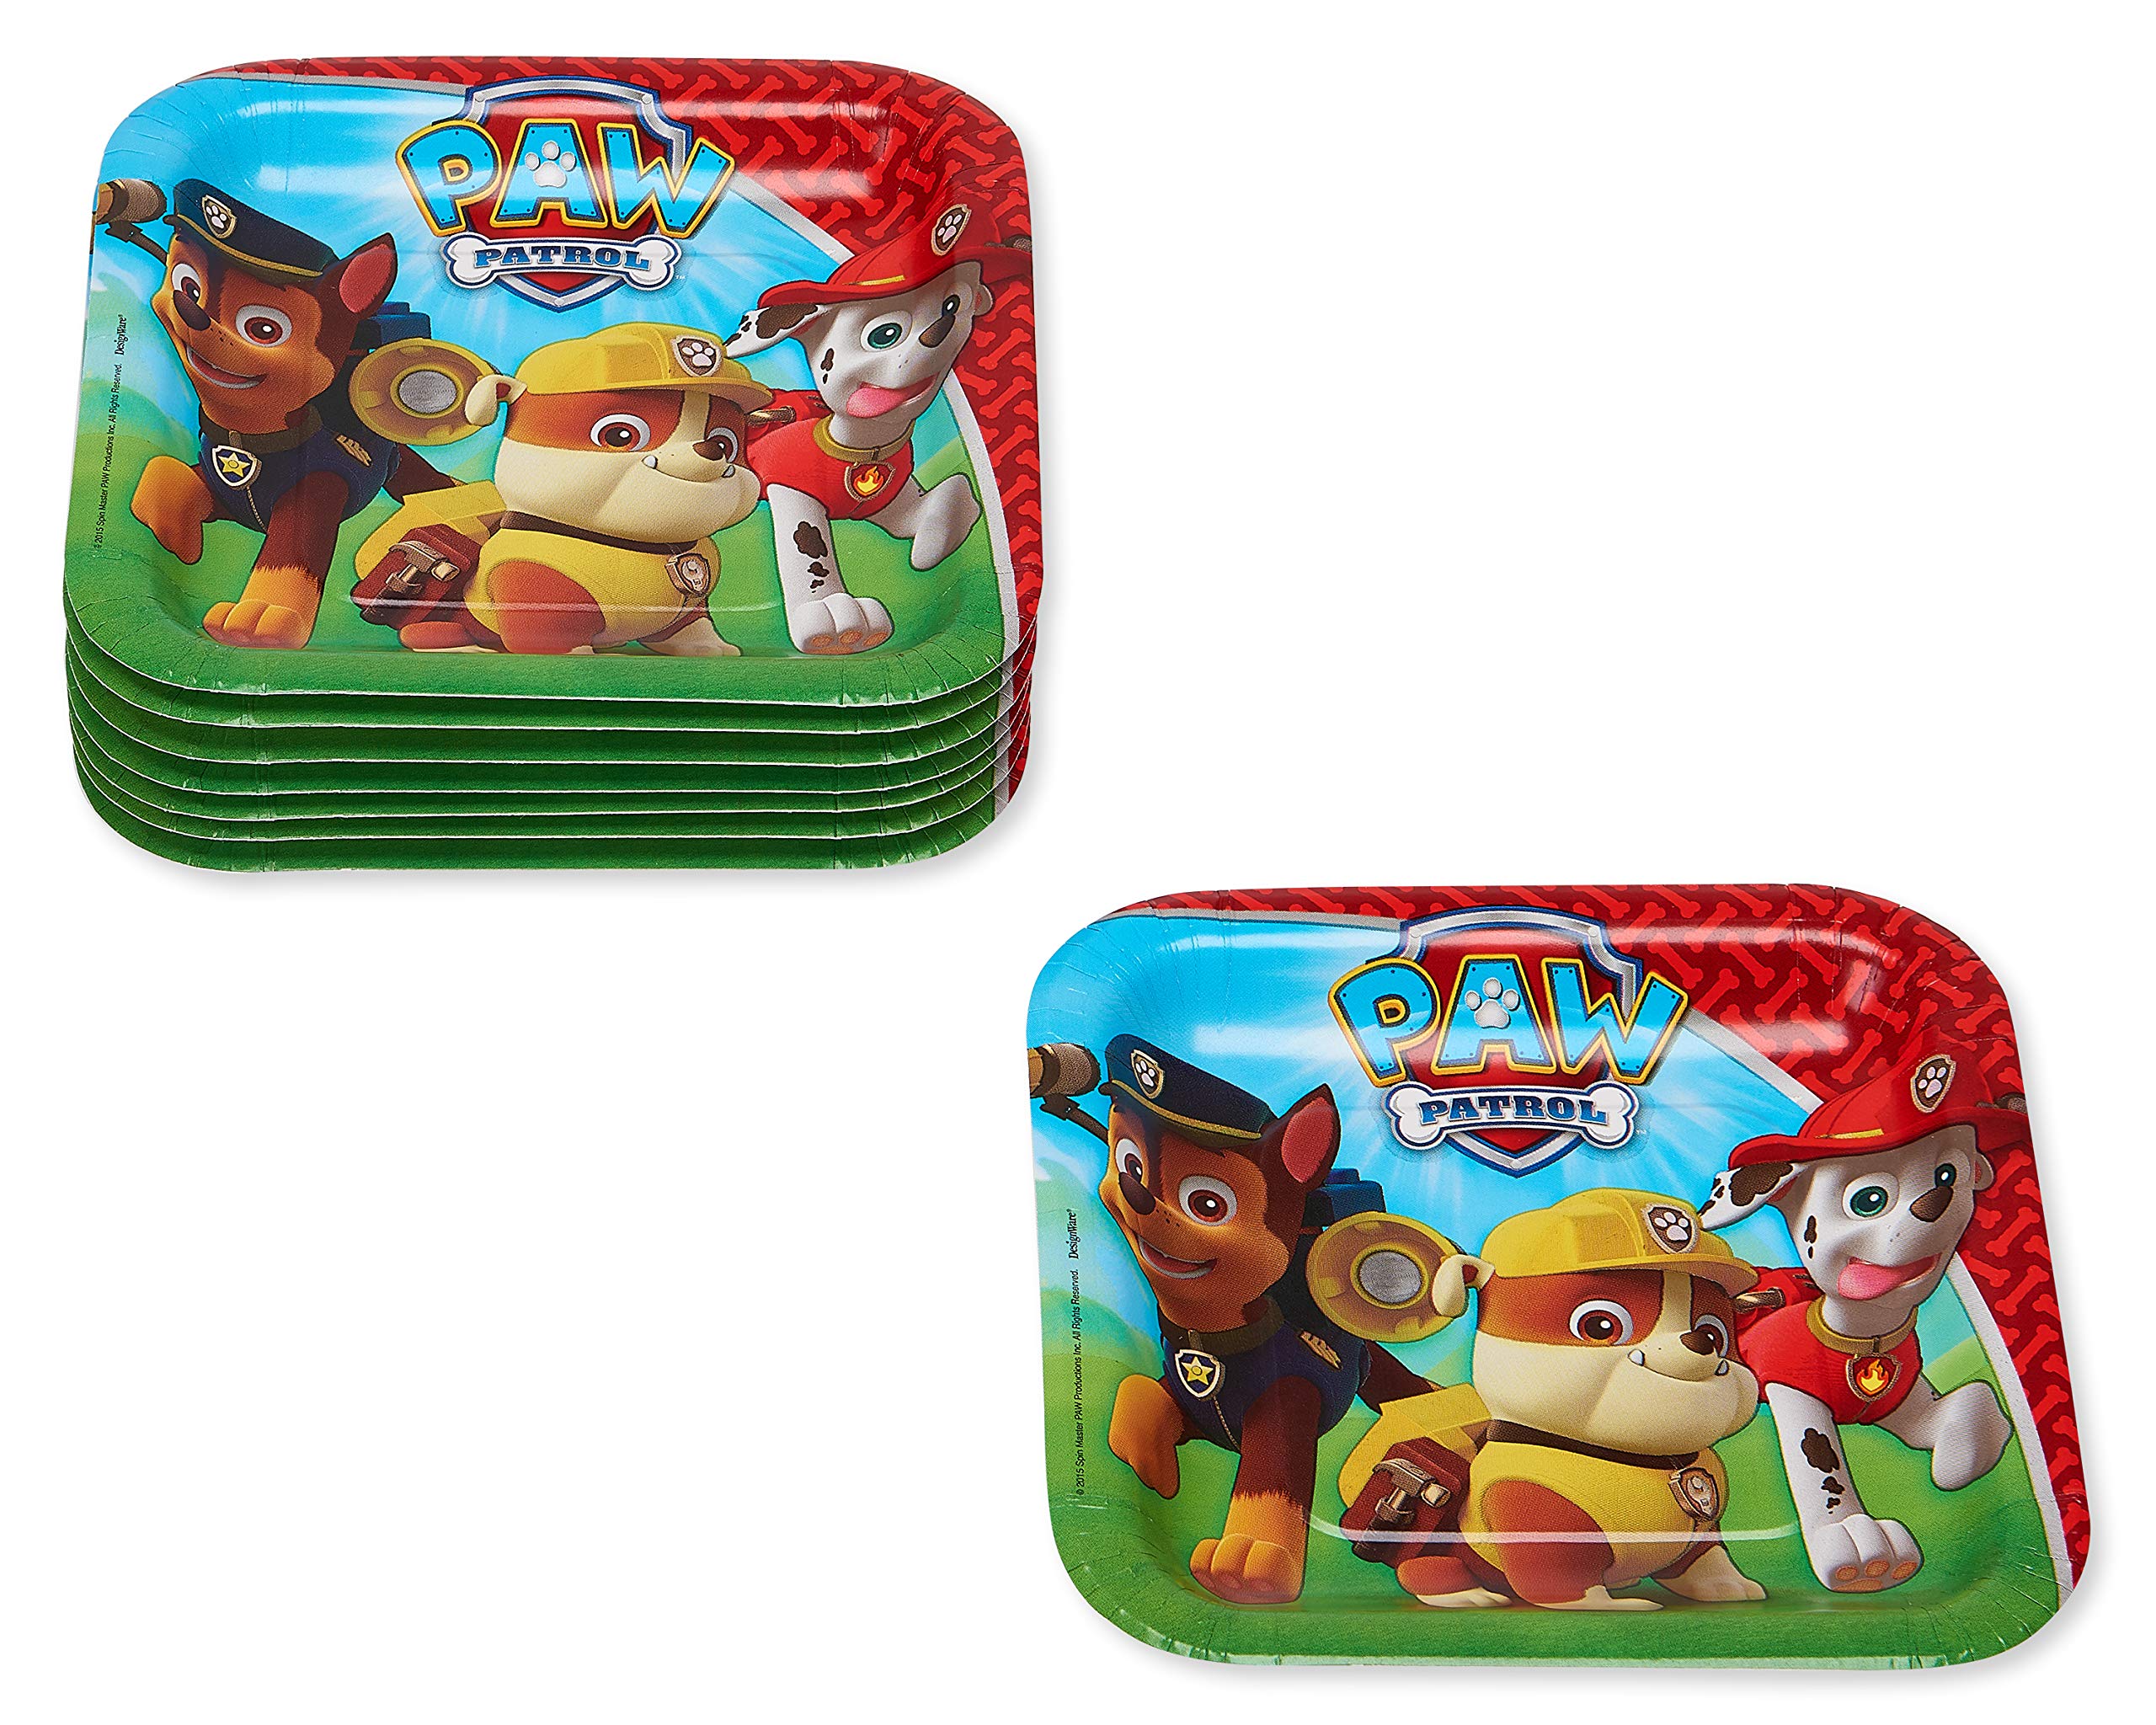 American Greetings Paw Patrol Party Supplies, Paper Dessert Plate (8-Count)